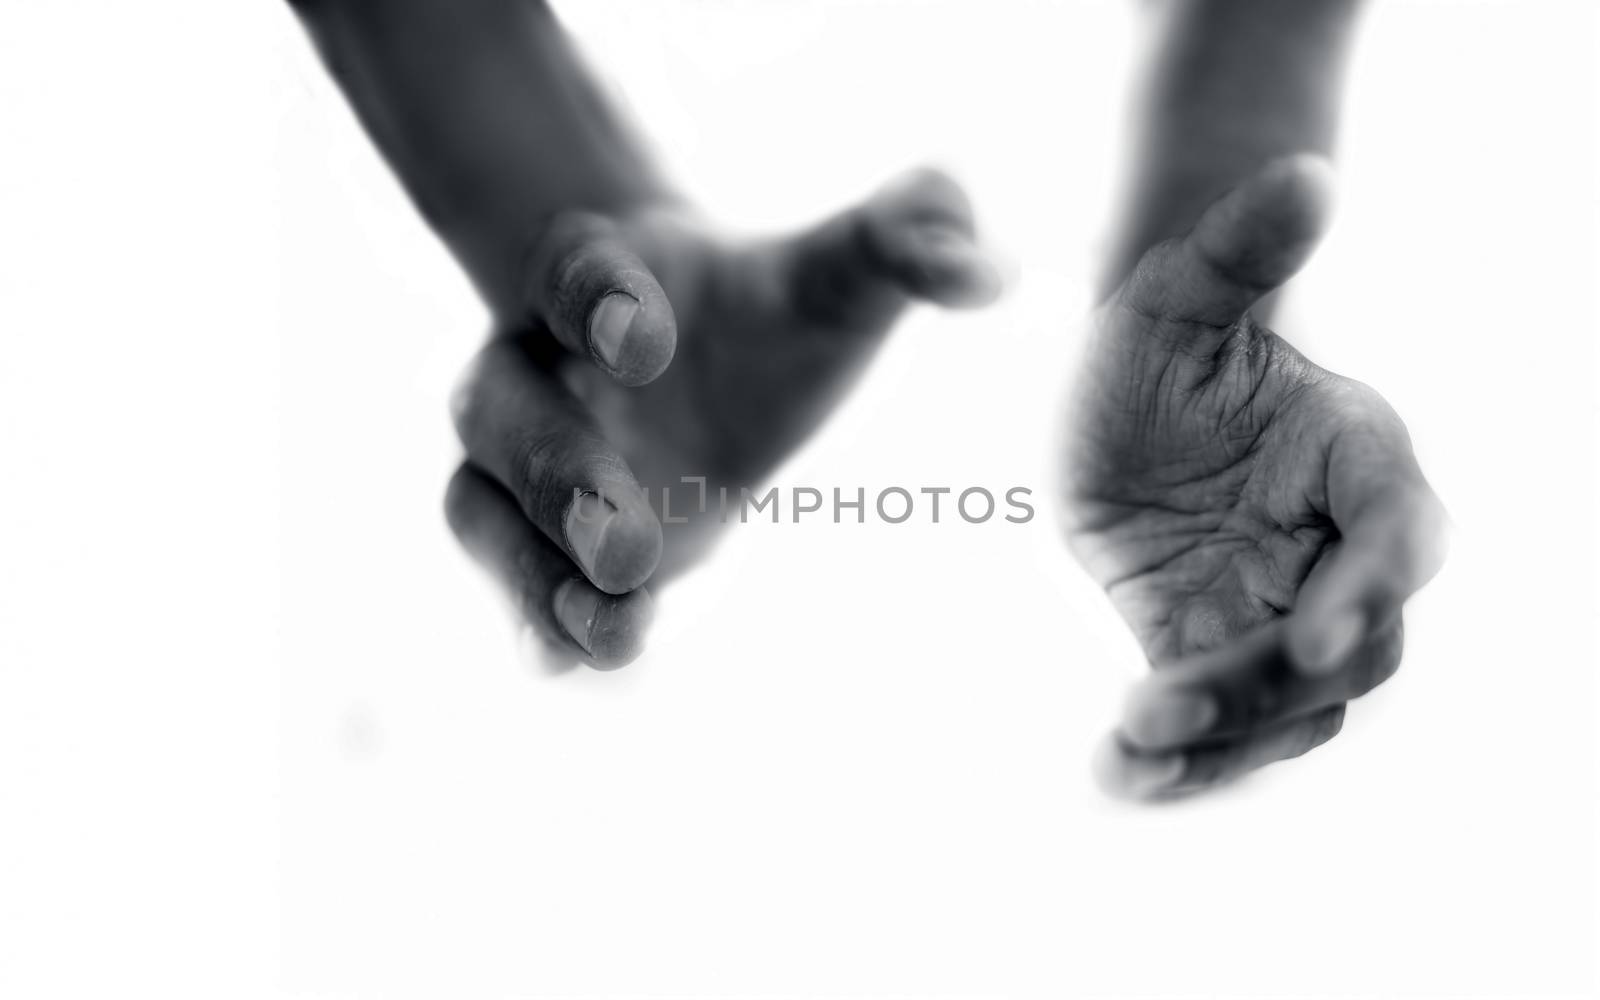 Close up of two hands imagery trying to help the one in need. by mirzamlk